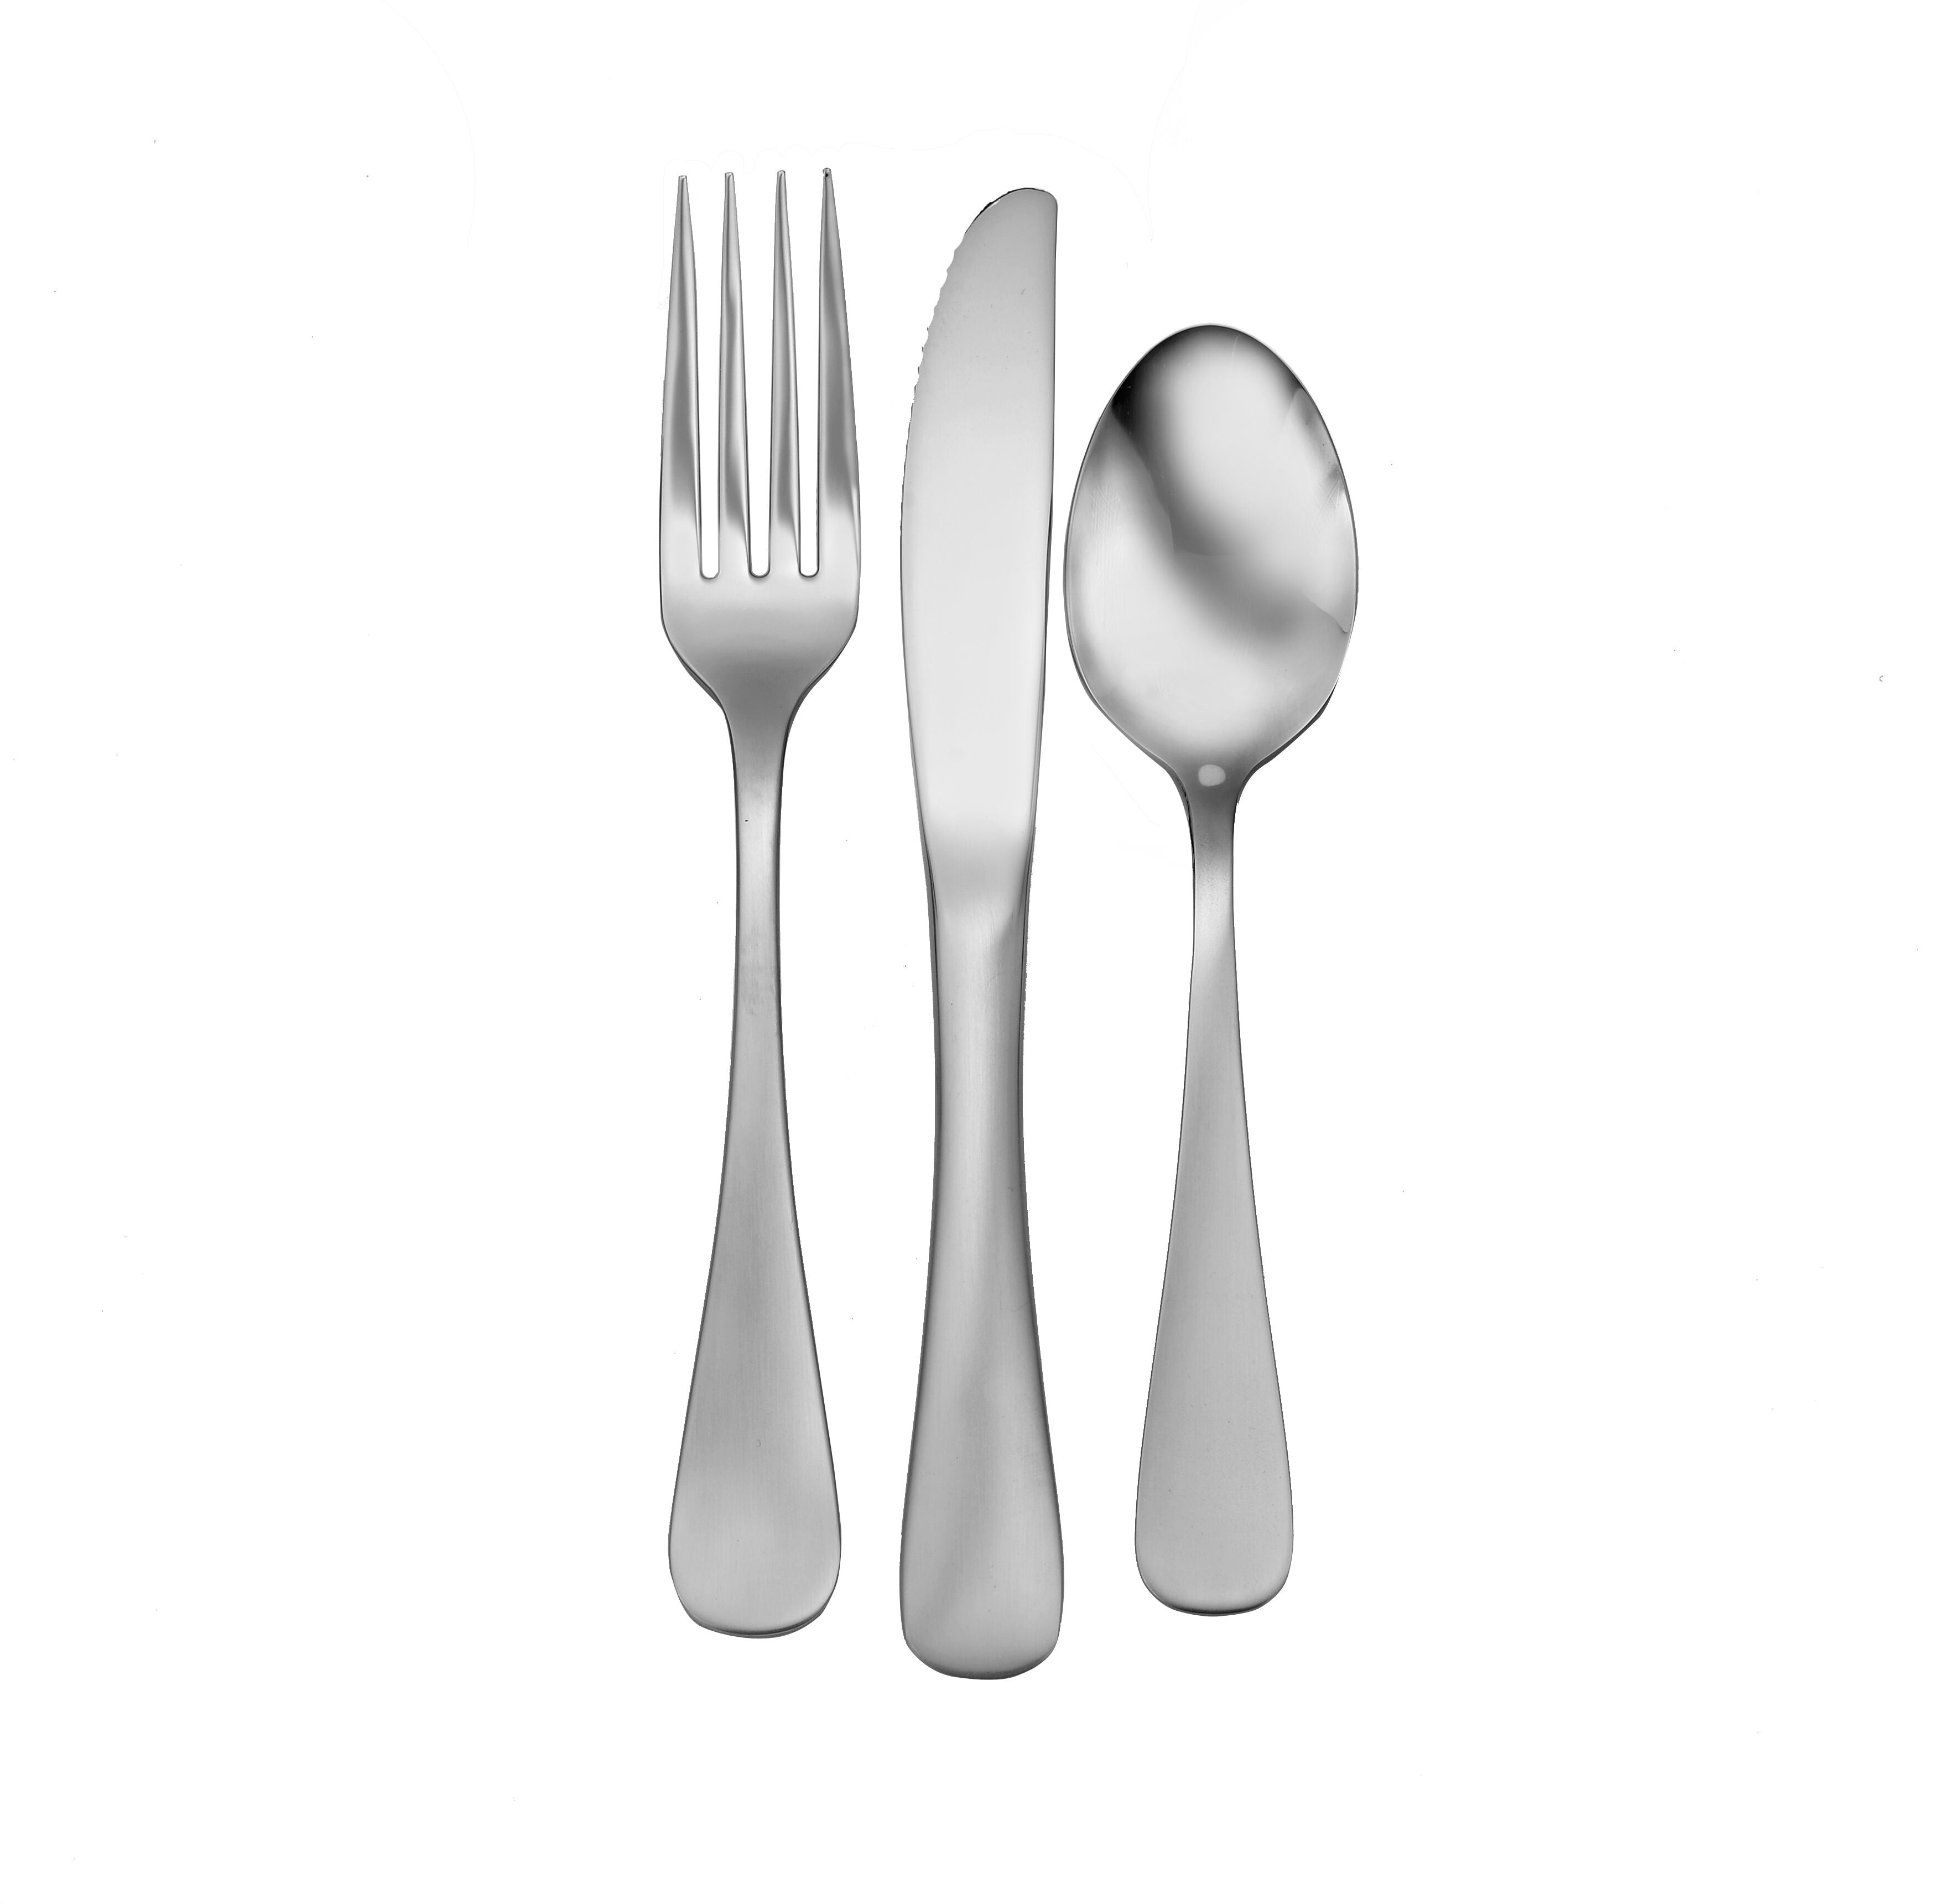 Liberty Tabletop Econo-Line - Liberty Tabletop - The Only Silverware Made  in the USA